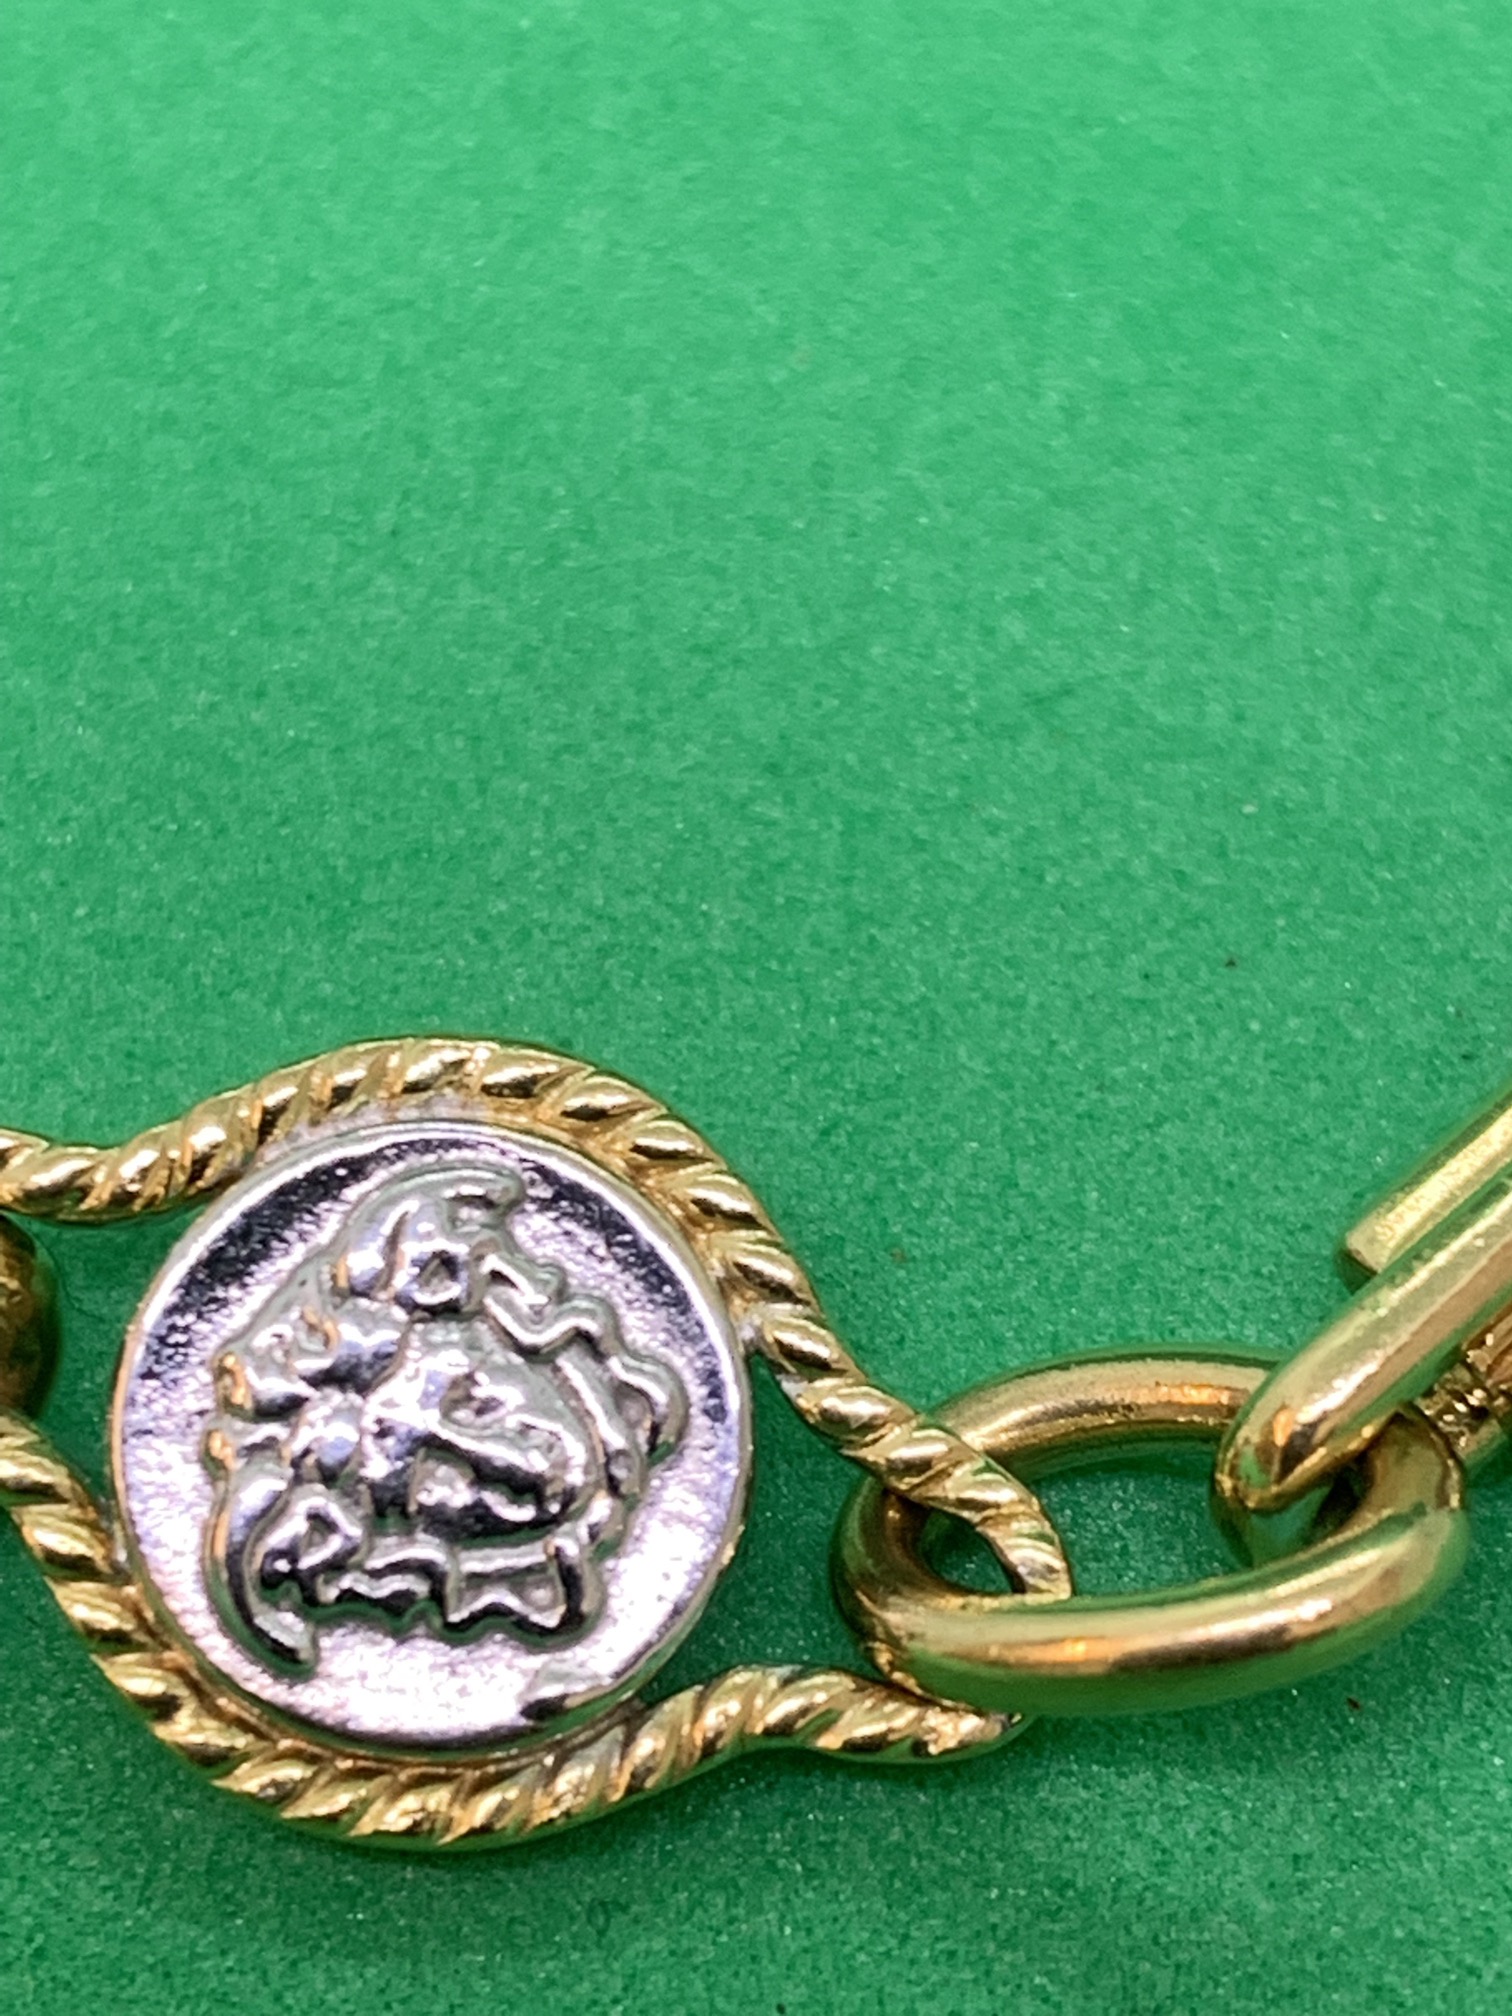 HEAVY 110 GRAMS APPROX VERSACE STYLE GOLD CHAIN - IMPRESSIVE - 24" - Image 6 of 7